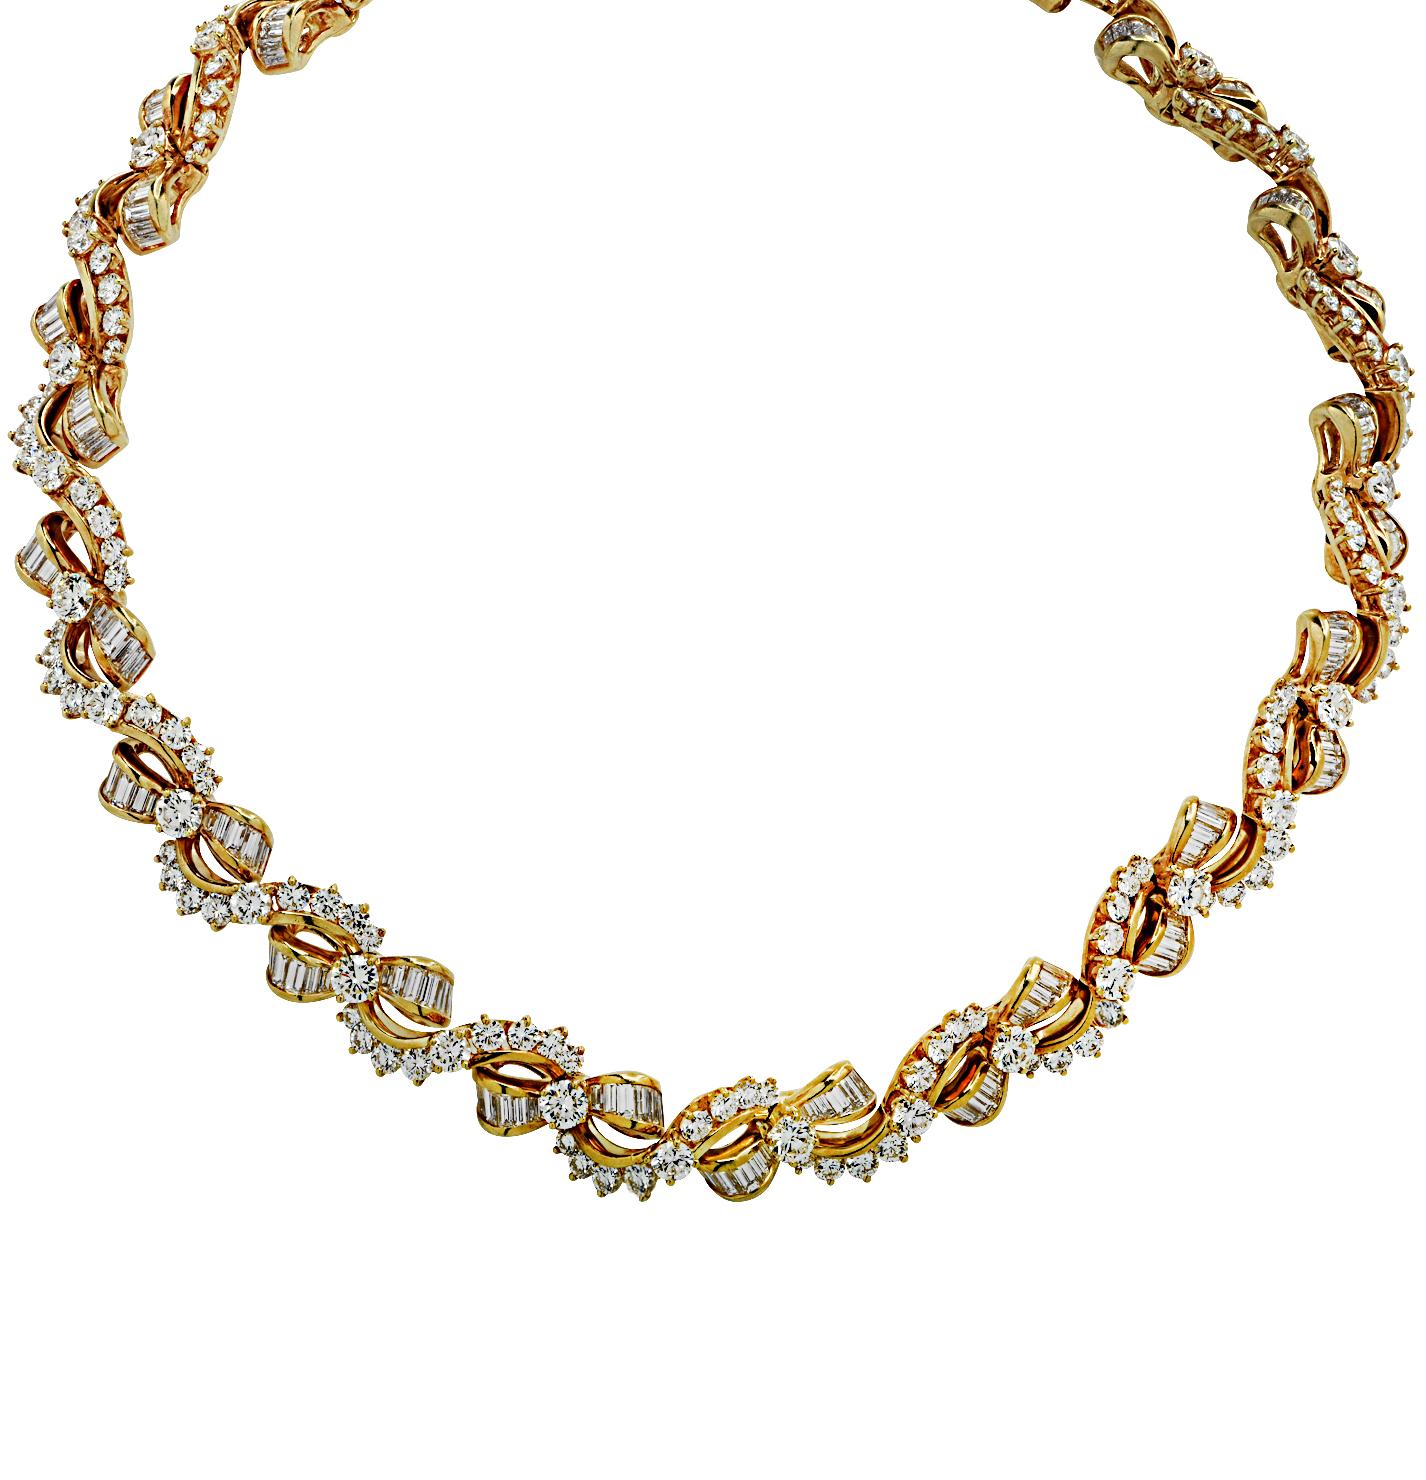 Spectacular Kurt Wayne necklace and bracelet set crafted in 18 karat yellow gold, featuring round brilliant and baguette cut diamonds weighing approximately 60.08 carats total, F-G color, VS clarity. Delightful bow motifs with round brilliant cut